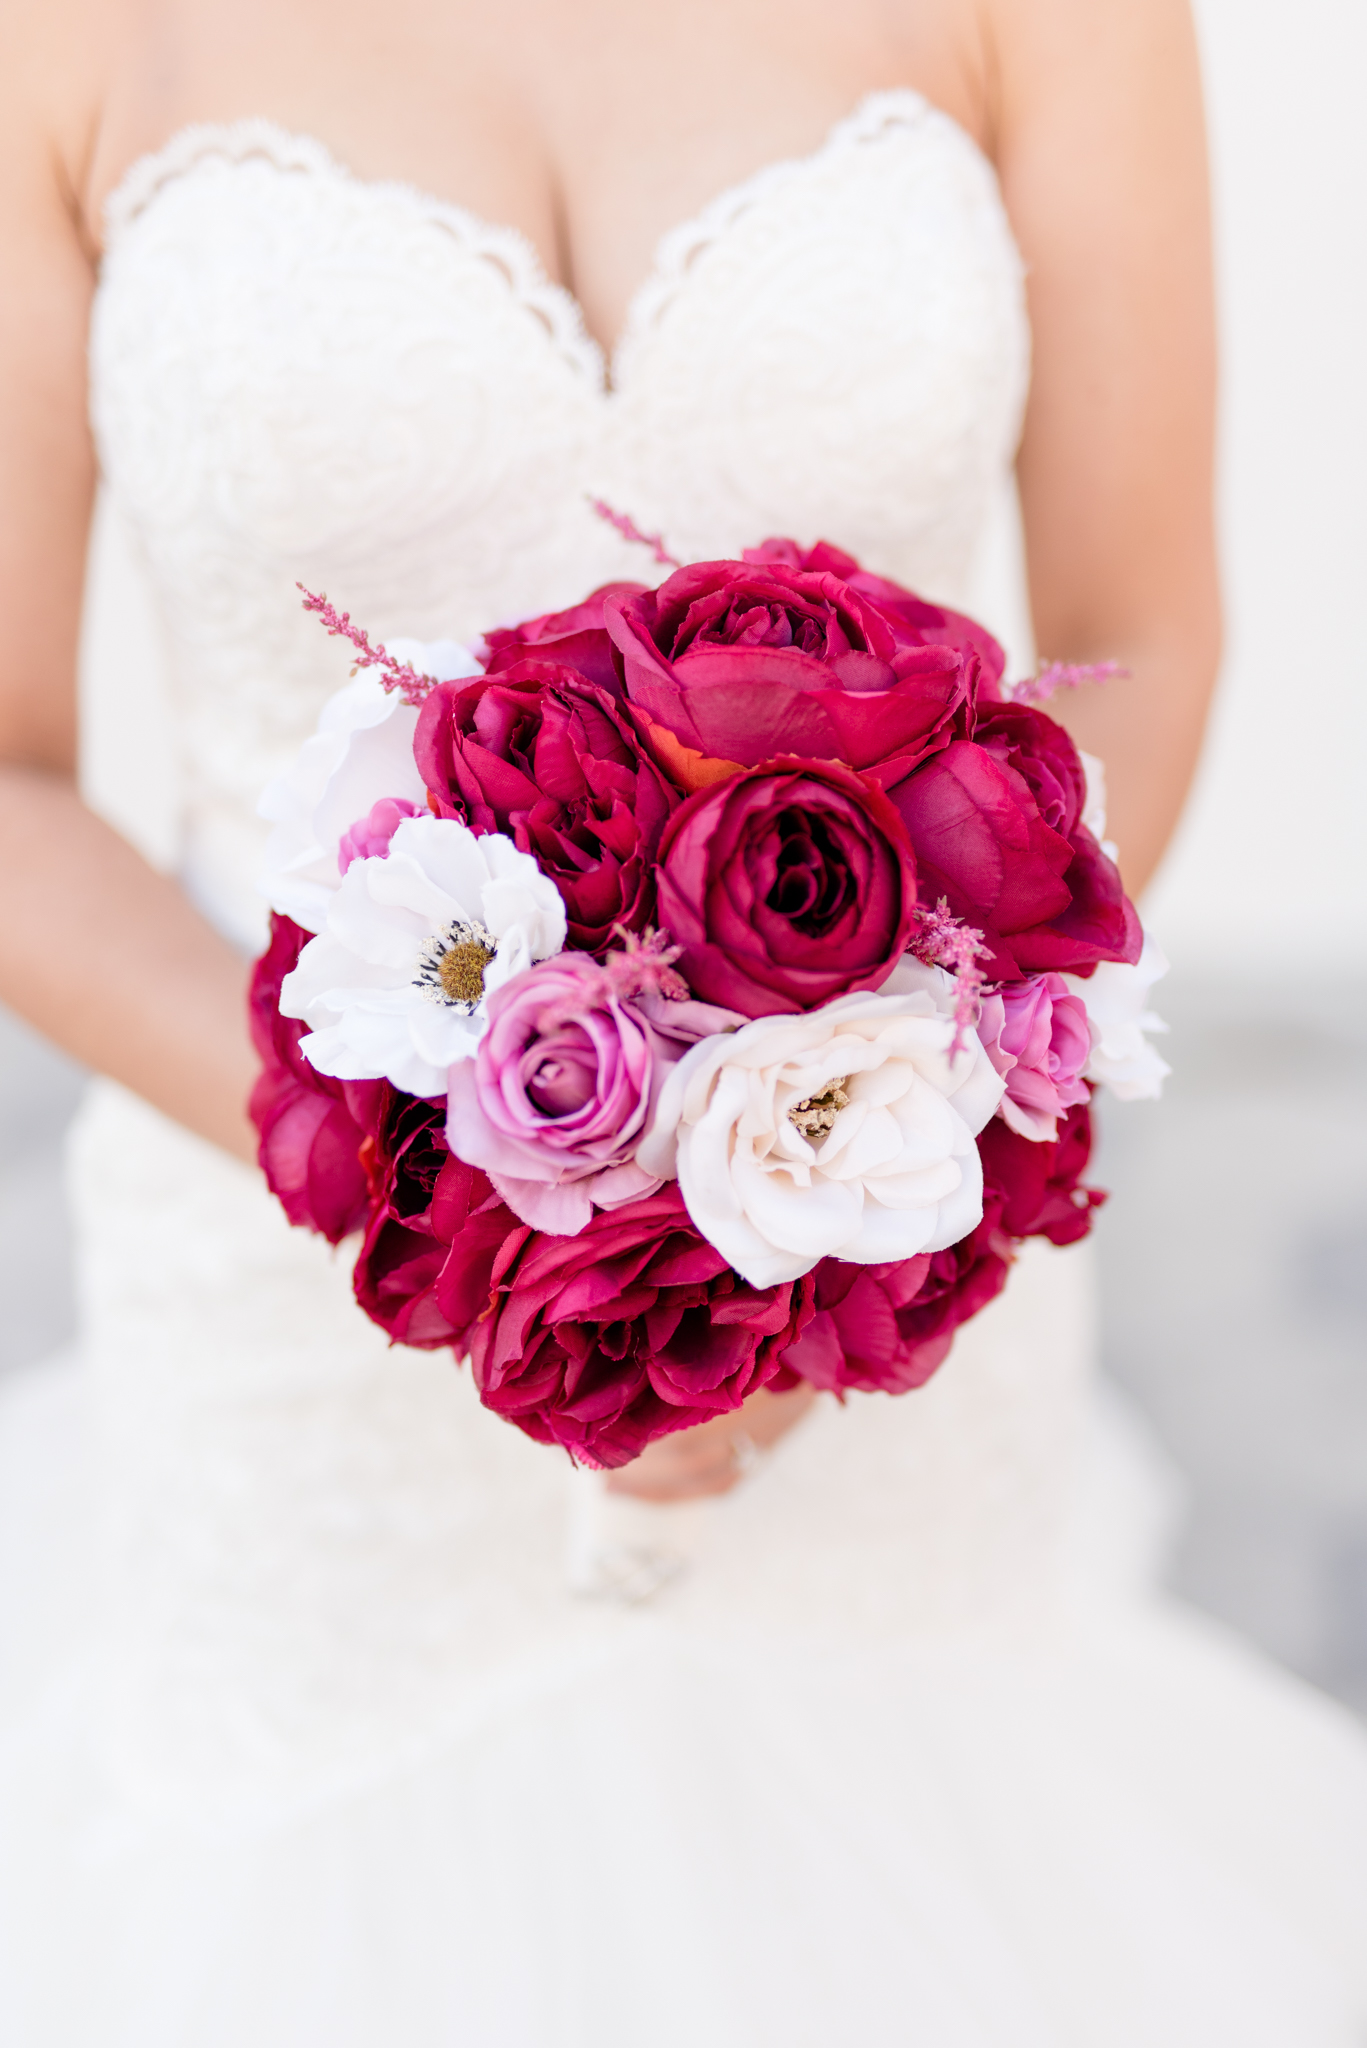 Bridal bouquet of red, pink, and white flowers.